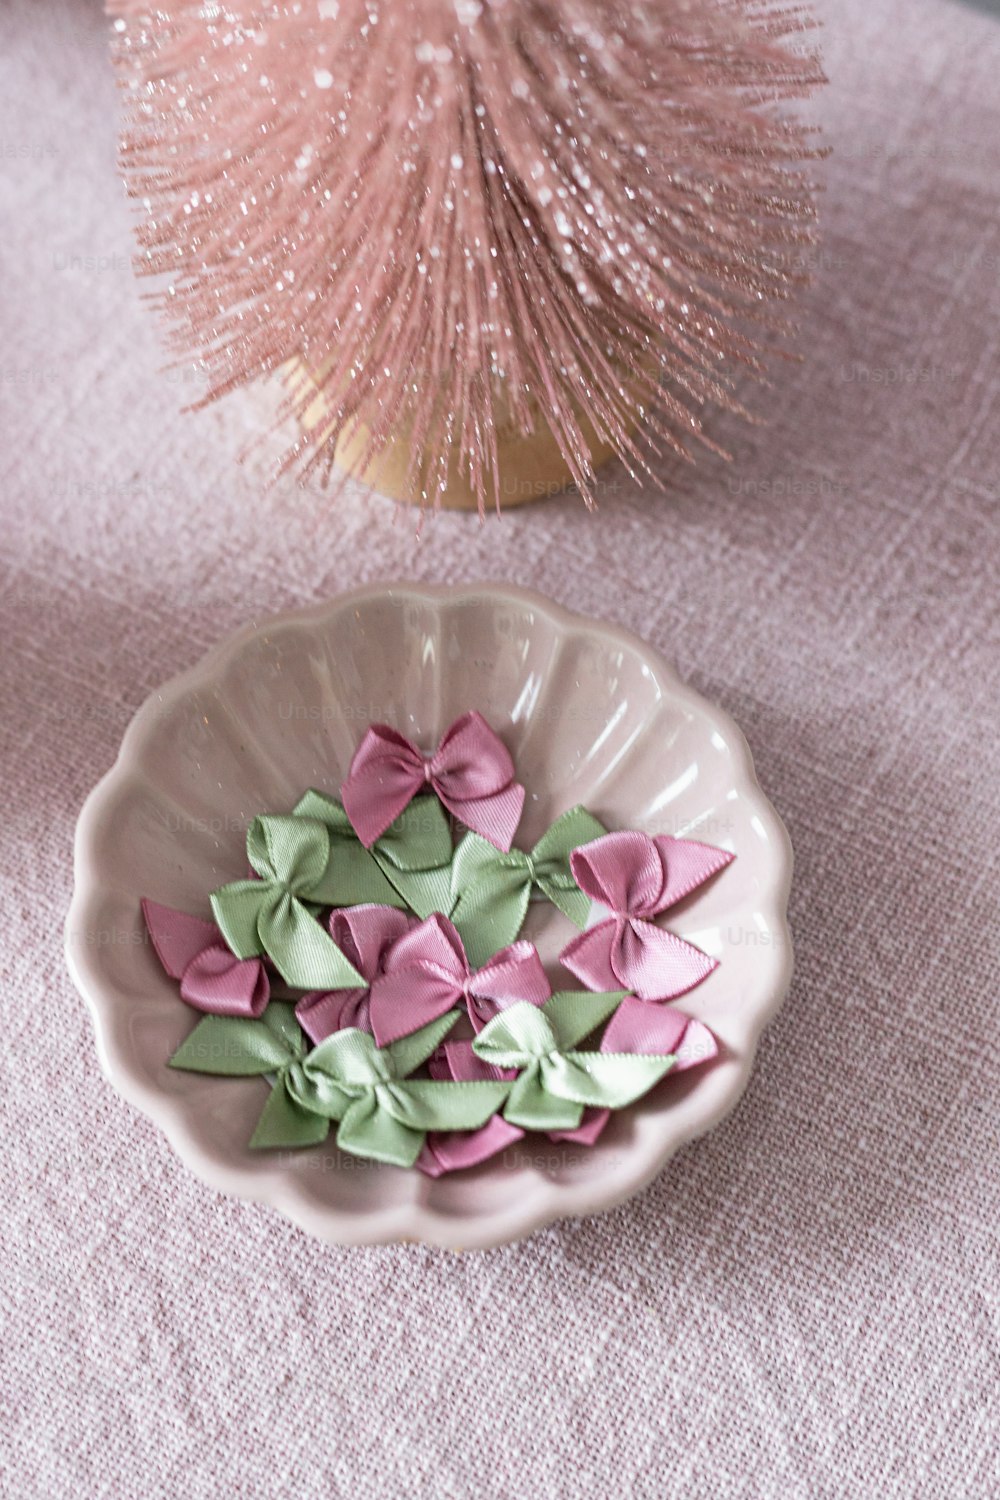 pink and green paper flowers in a bowl